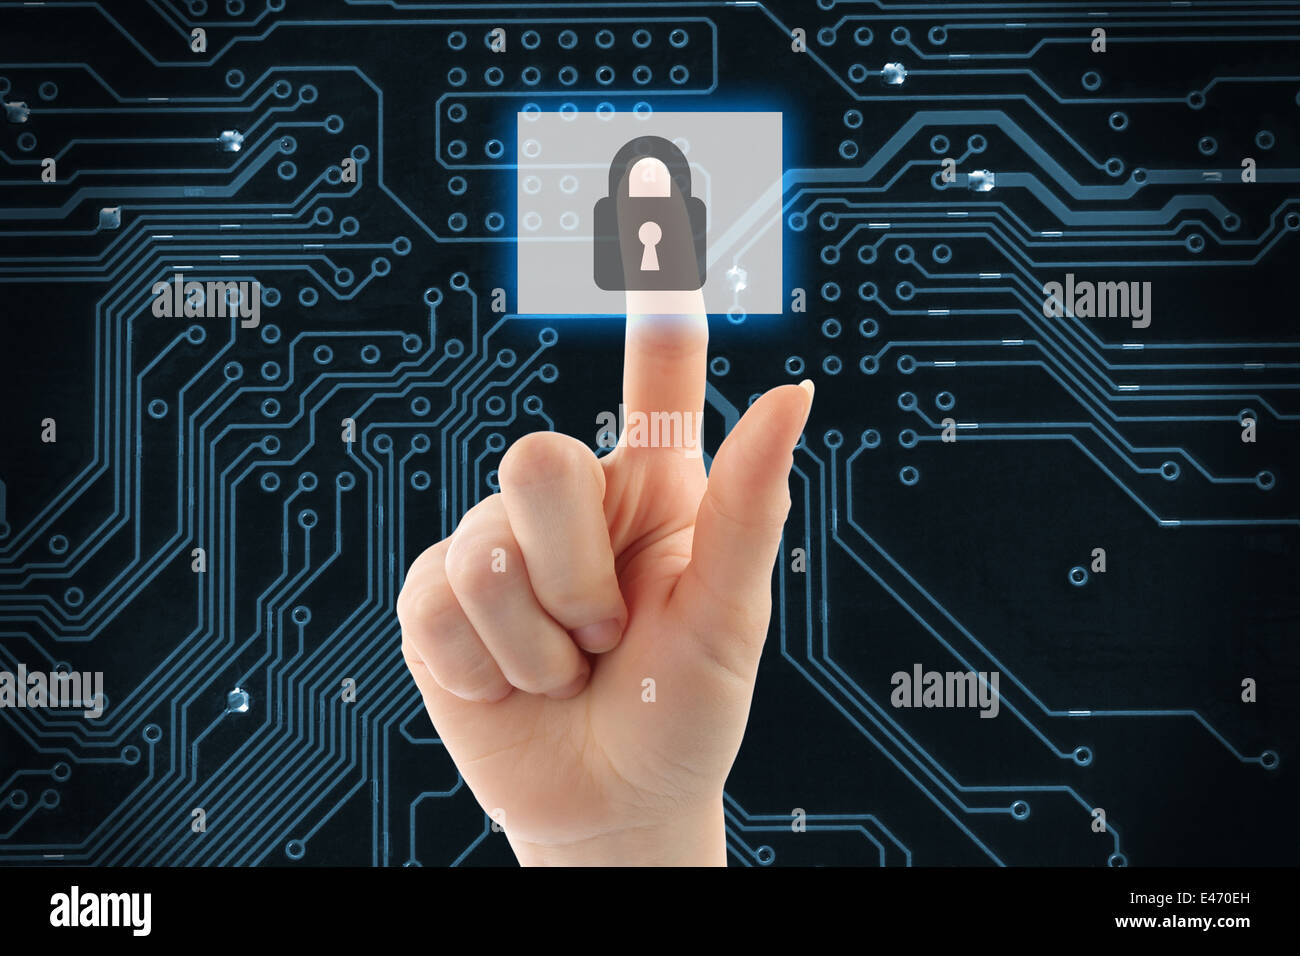 Hand pushing virtual security button on digital background Stock Photo